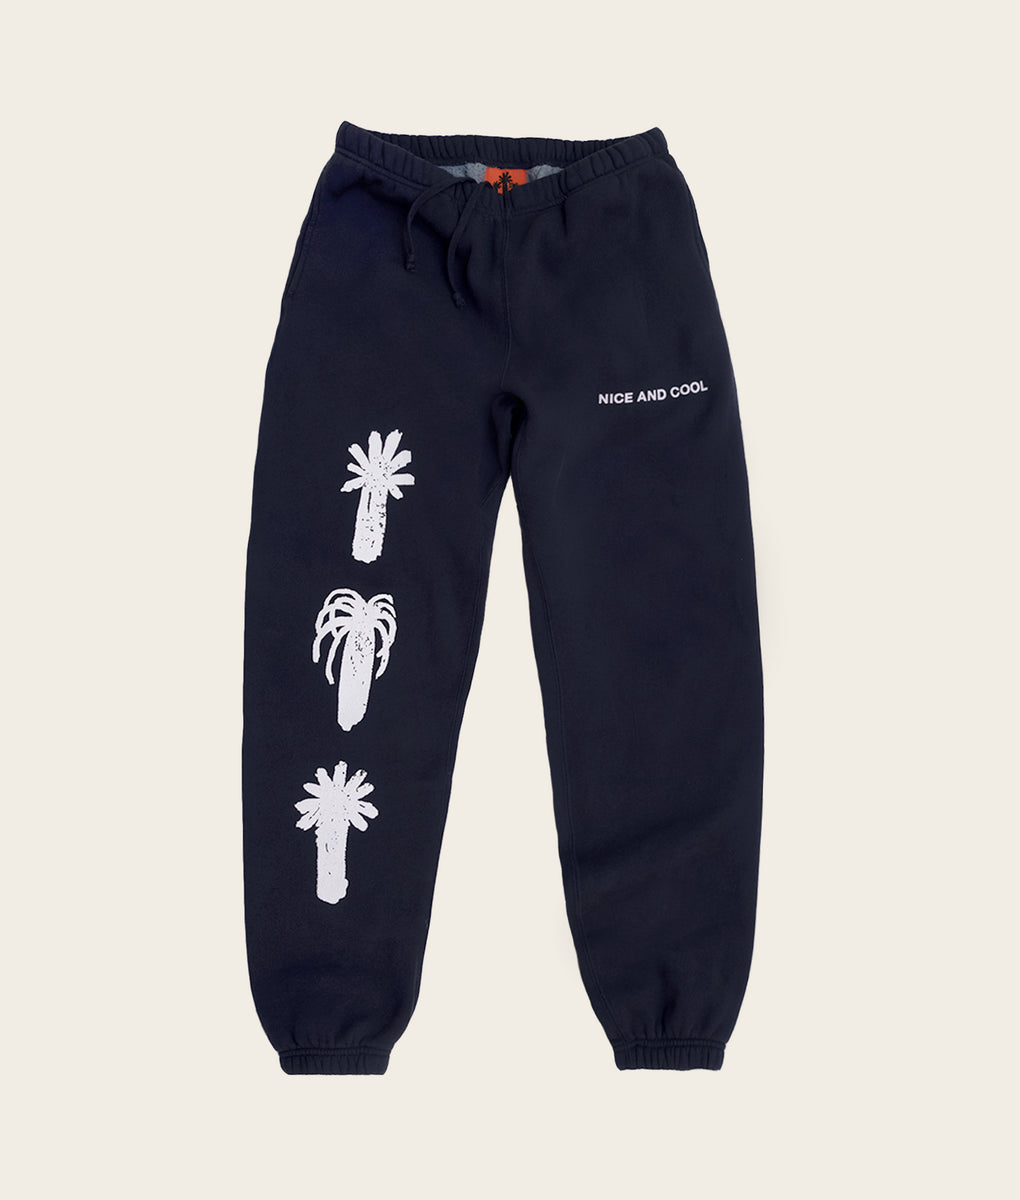 Beachly - Pacific Palms Sweatpants - Pacific Blue (Add-On)